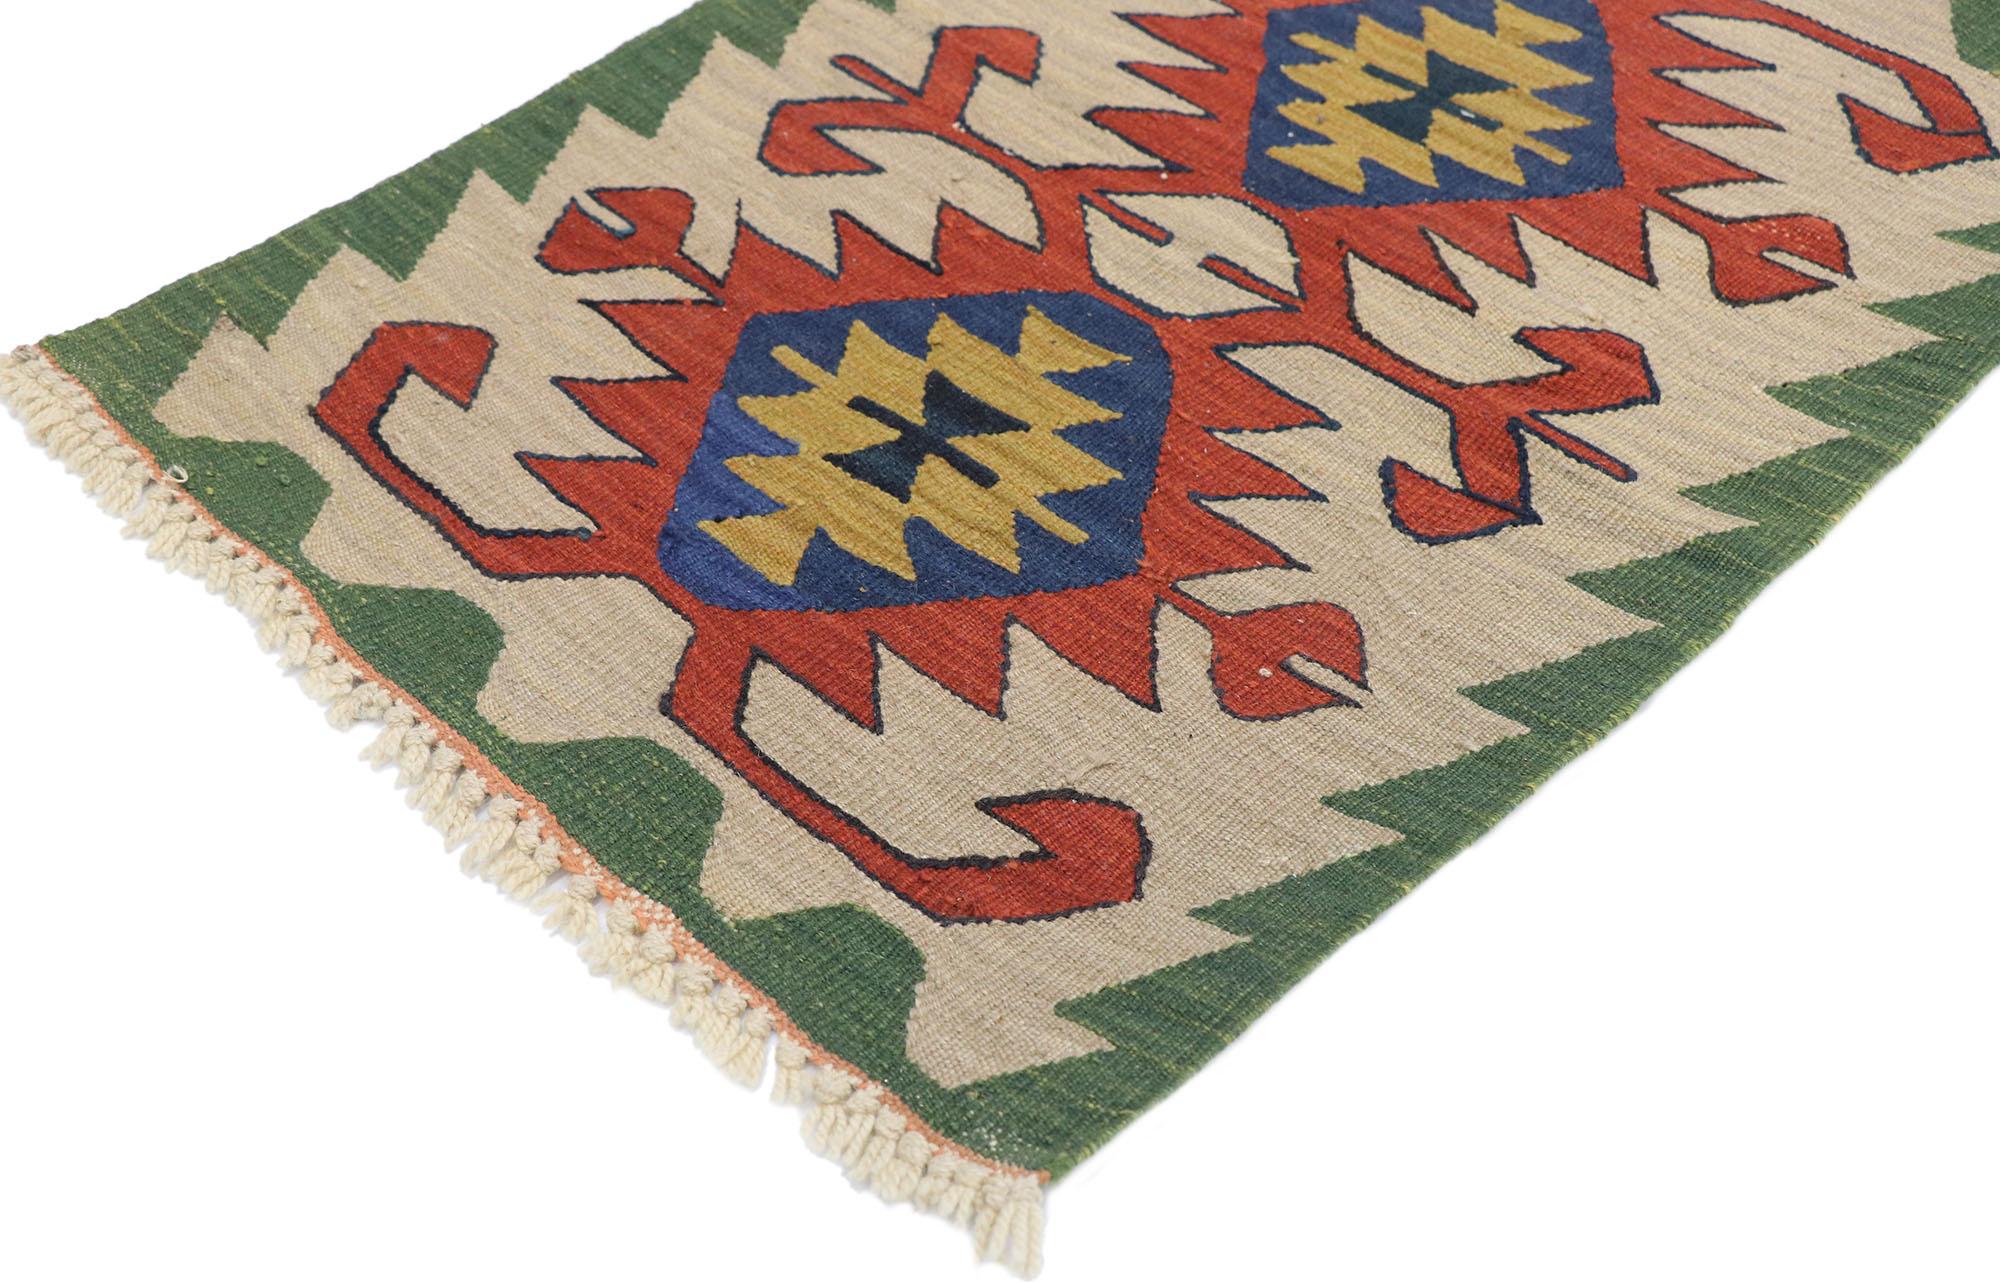 77875, Vintage Persian Shiraz Kilim rug with Tribal Style 01'10 x 02'09. Full of tiny details and a bold expressive design combined with vibrant colors and tribal style, this hand-woven wool vintage Persian Shiraz kilim rug is a captivating vision